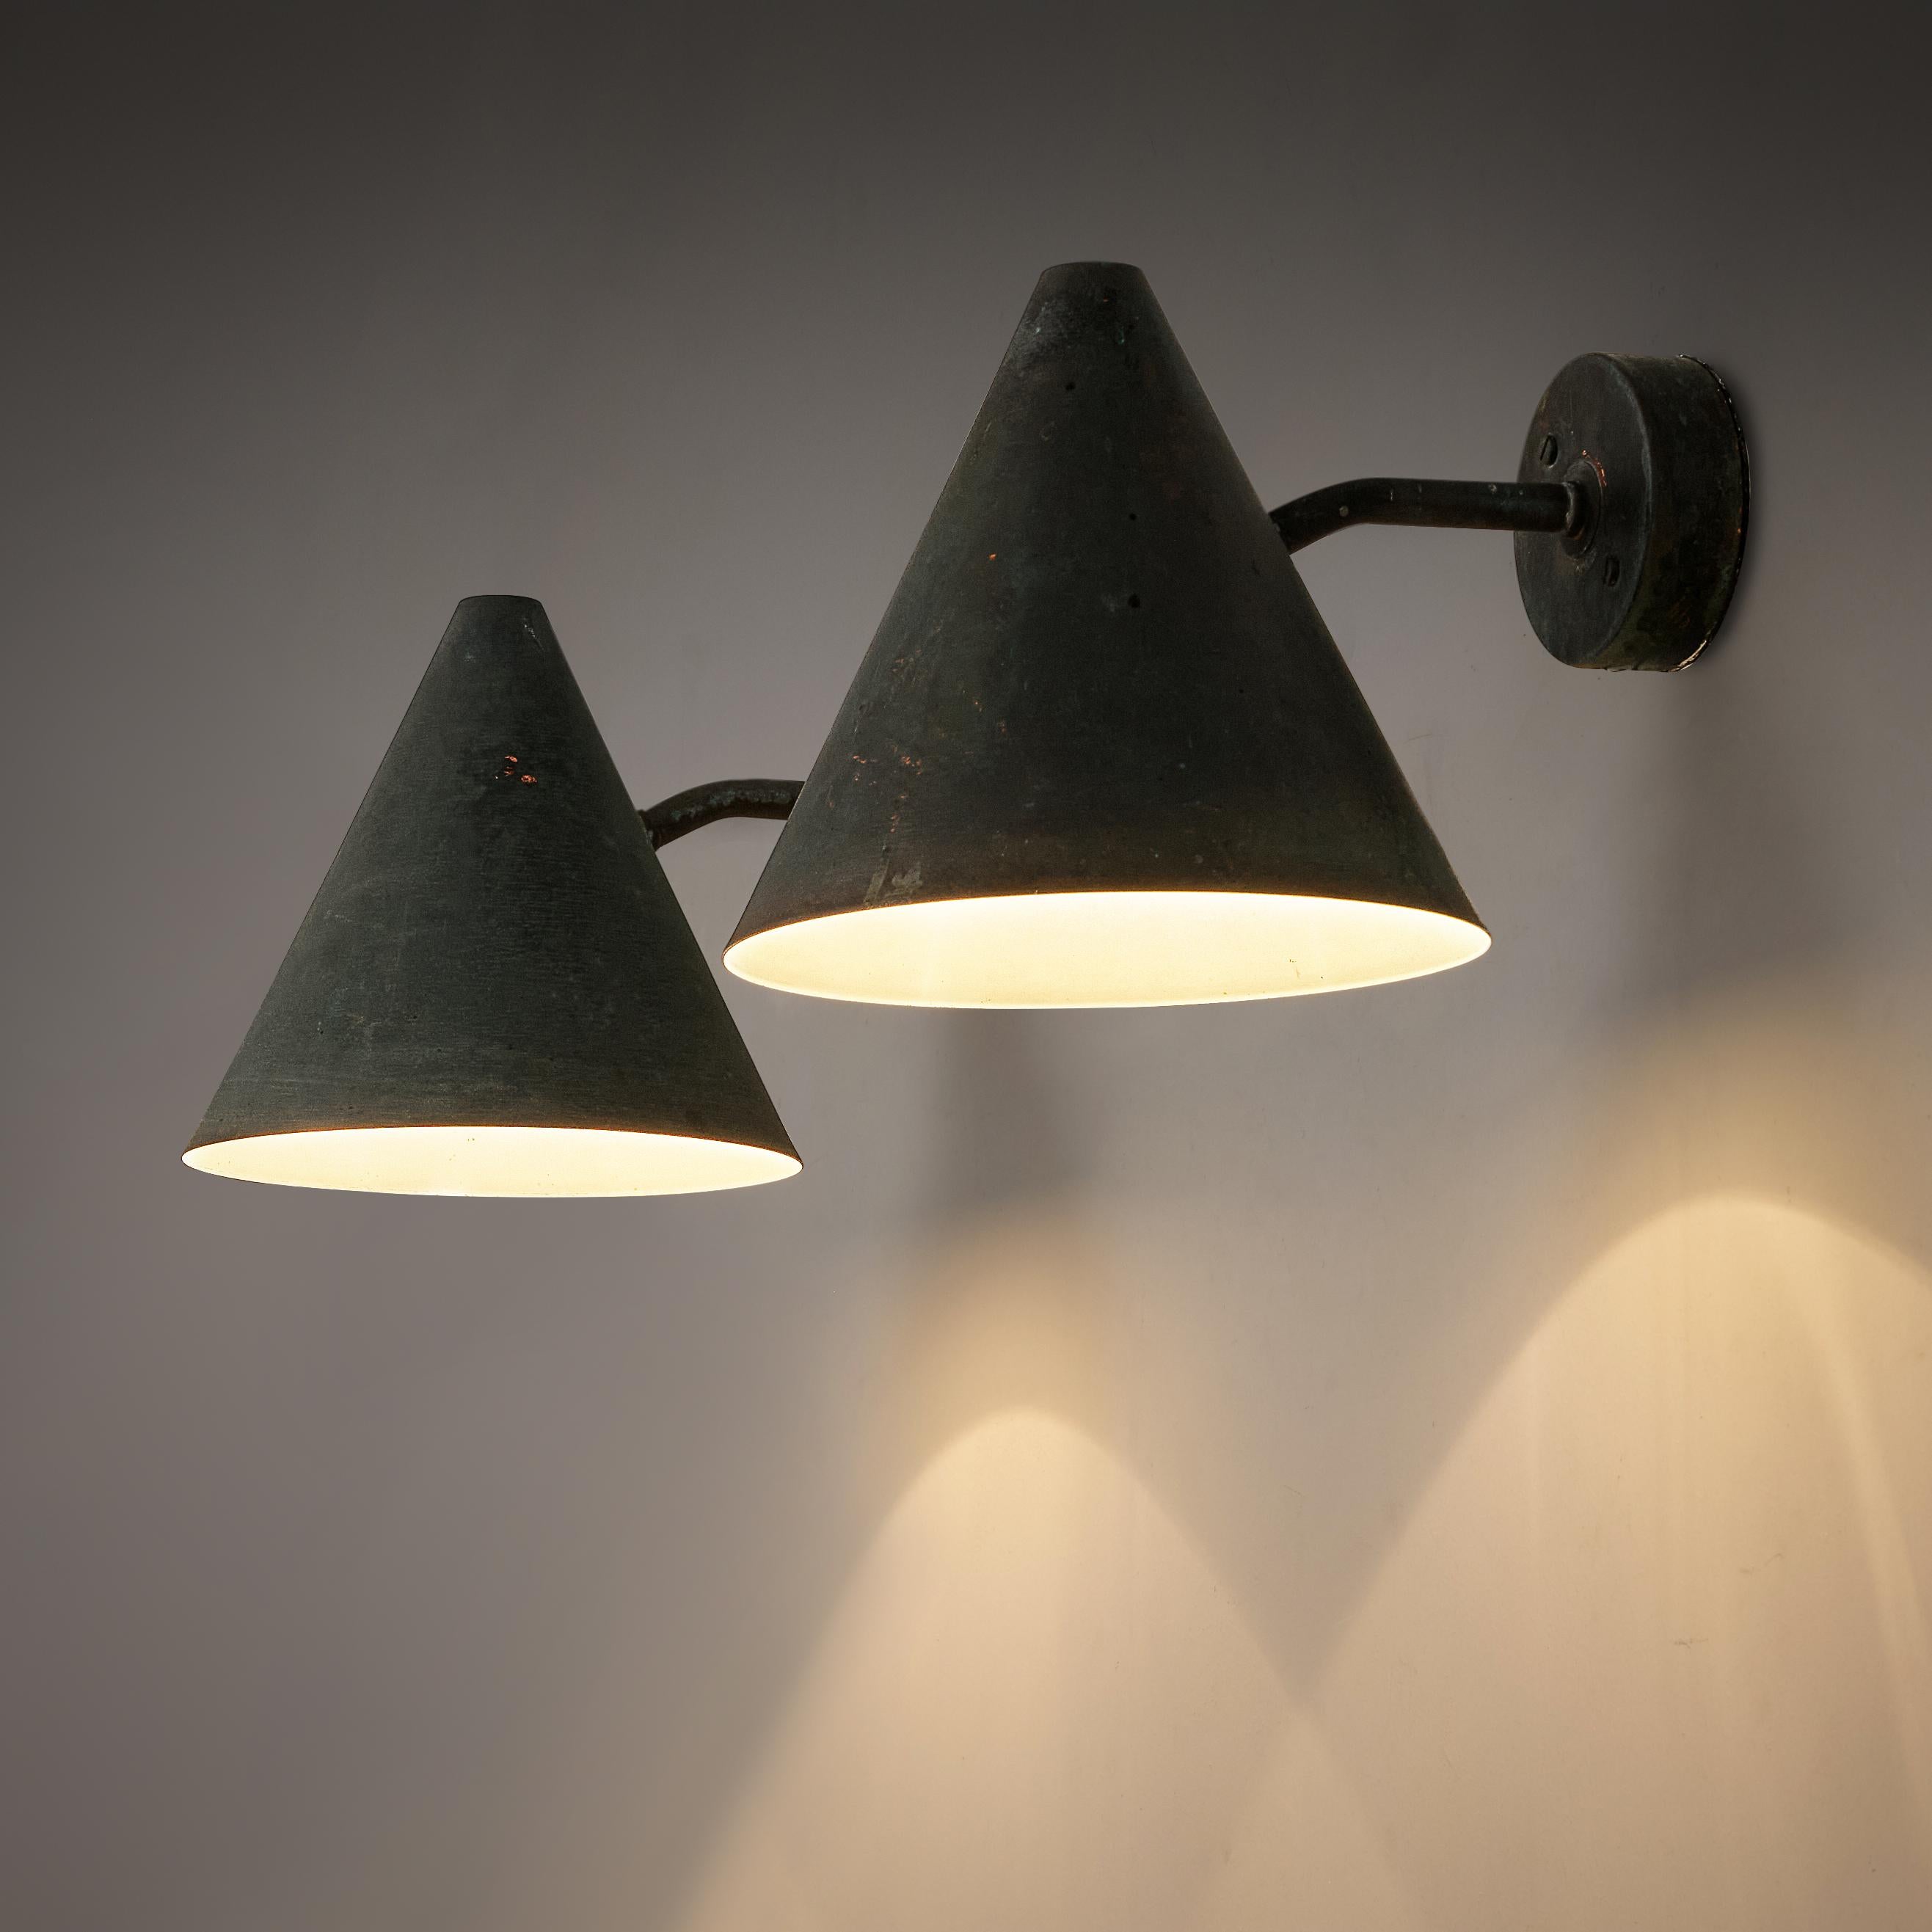 Hans-Agne Jakobsson for AB Markaryd, wall lights ‘Tratten’, copper, Sweden, 1950s

Set of cone-shaped wall lights designed by Hans-Agne Jakobsson for AB Markaryd, in beautifully patinated copper with an off-white inside. The light that this model